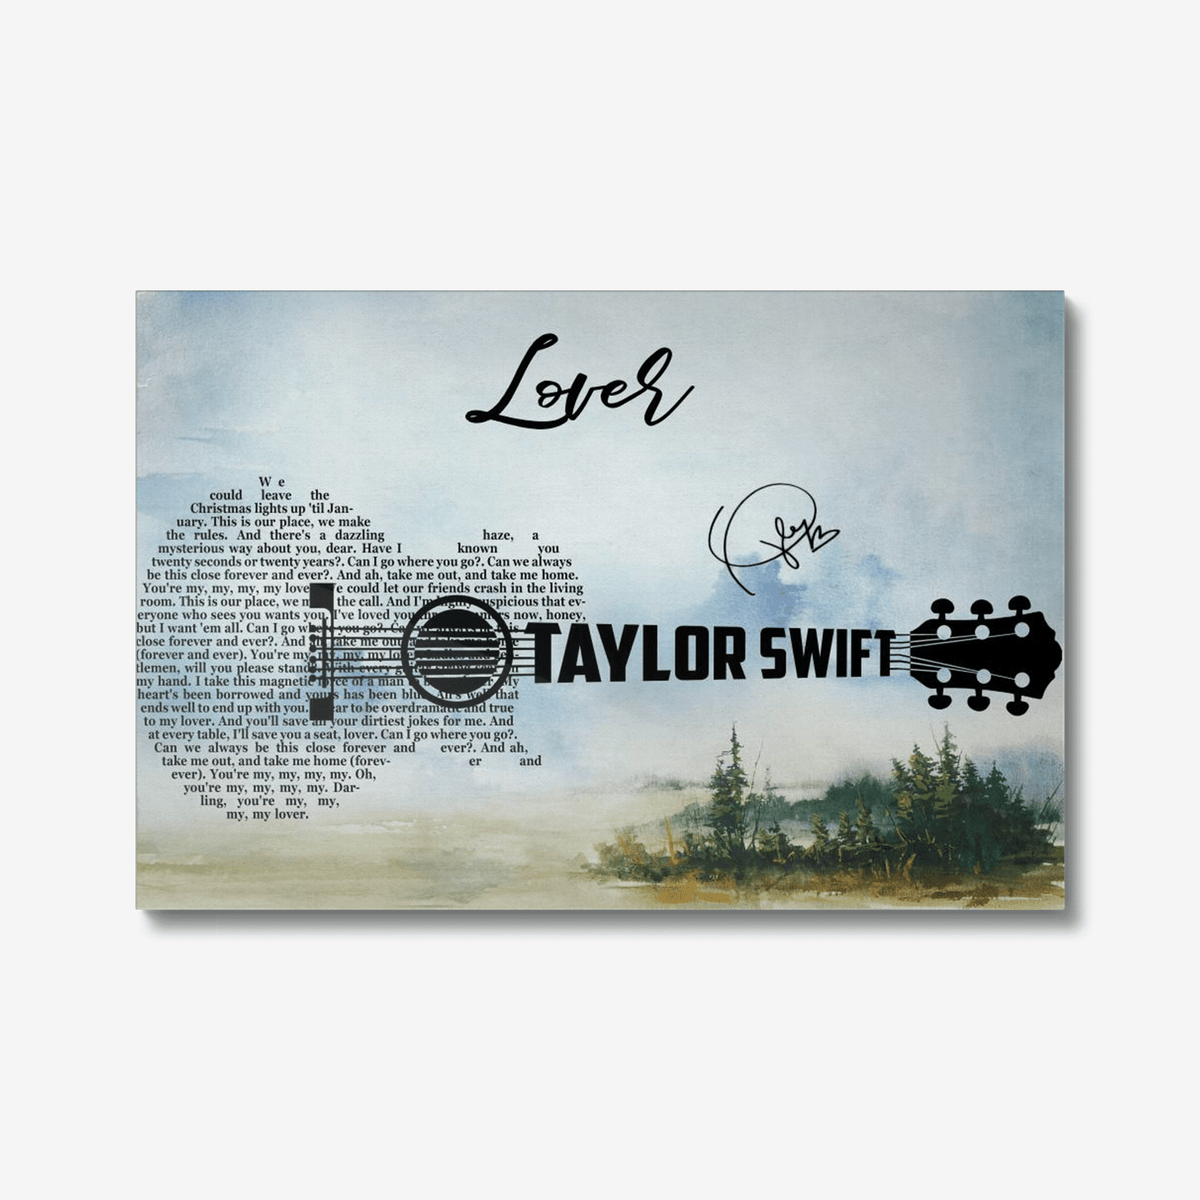 Lover Taylor Swift Guitar Canvas Painting Ideas, Canvas Hanging Prints, Gift Idea Framed Prints, Canvas Paintings Wrapped Canvas 8x10